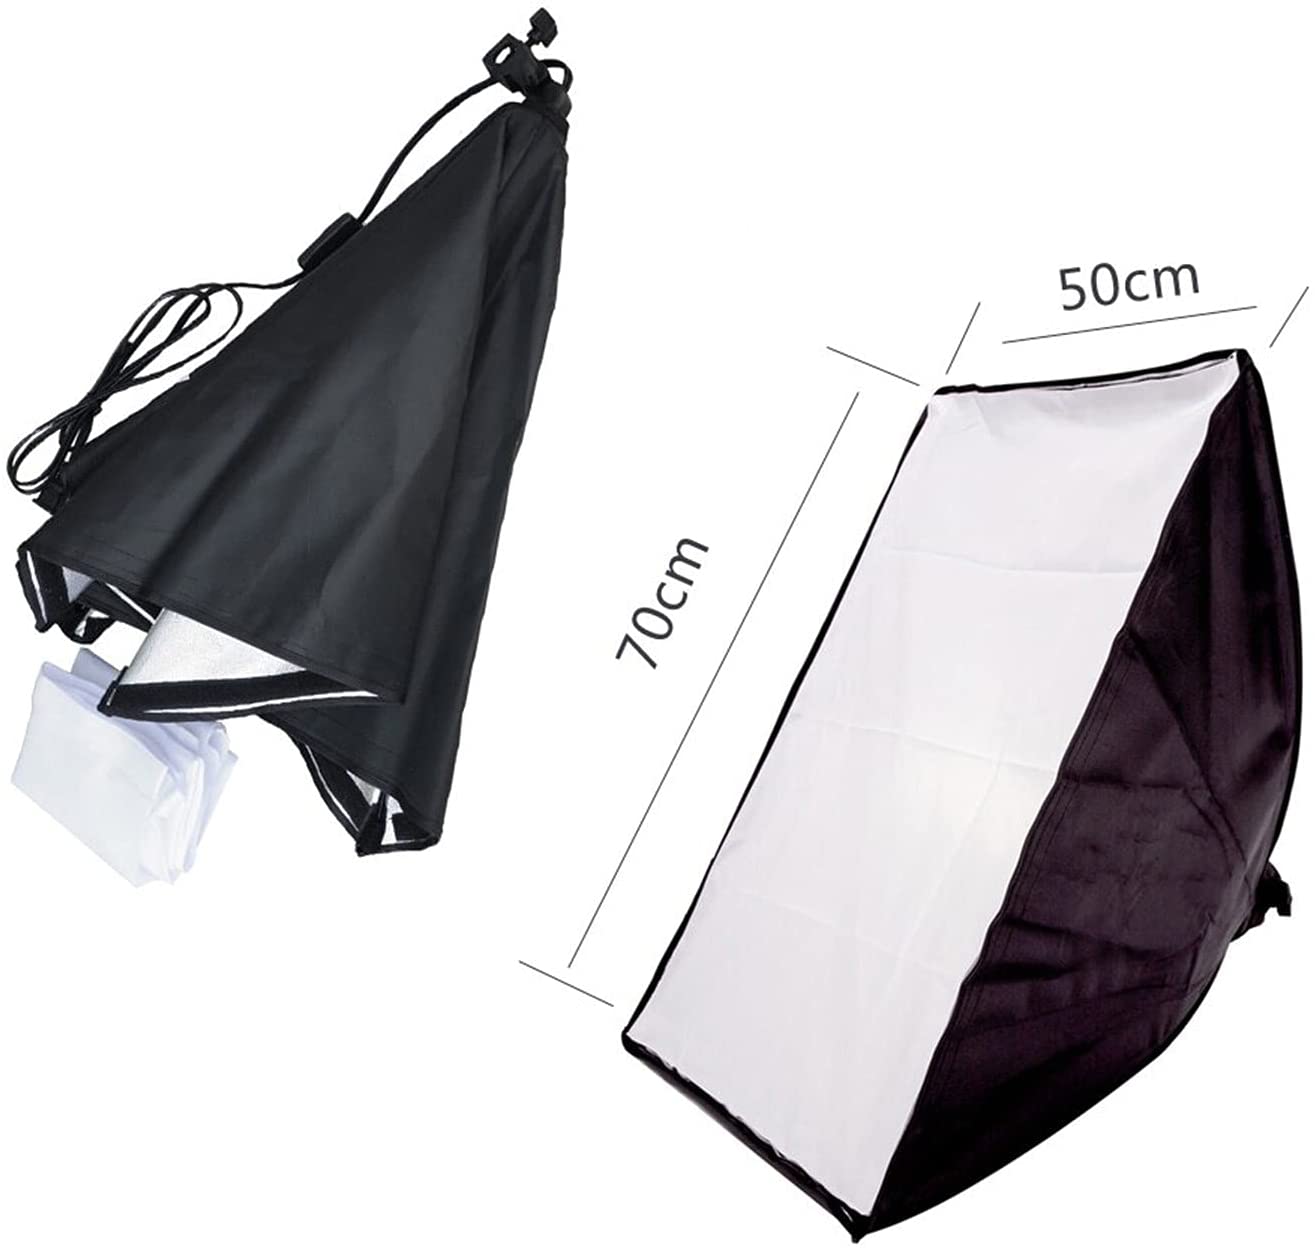 COOLBABY RGX Photography Rectangle Continuous SoftBox Lighting Kit 4pcs 50x70cm Softbox 2pcs Light Holder Stand Photo Studio Equipment Set - COOLBABY